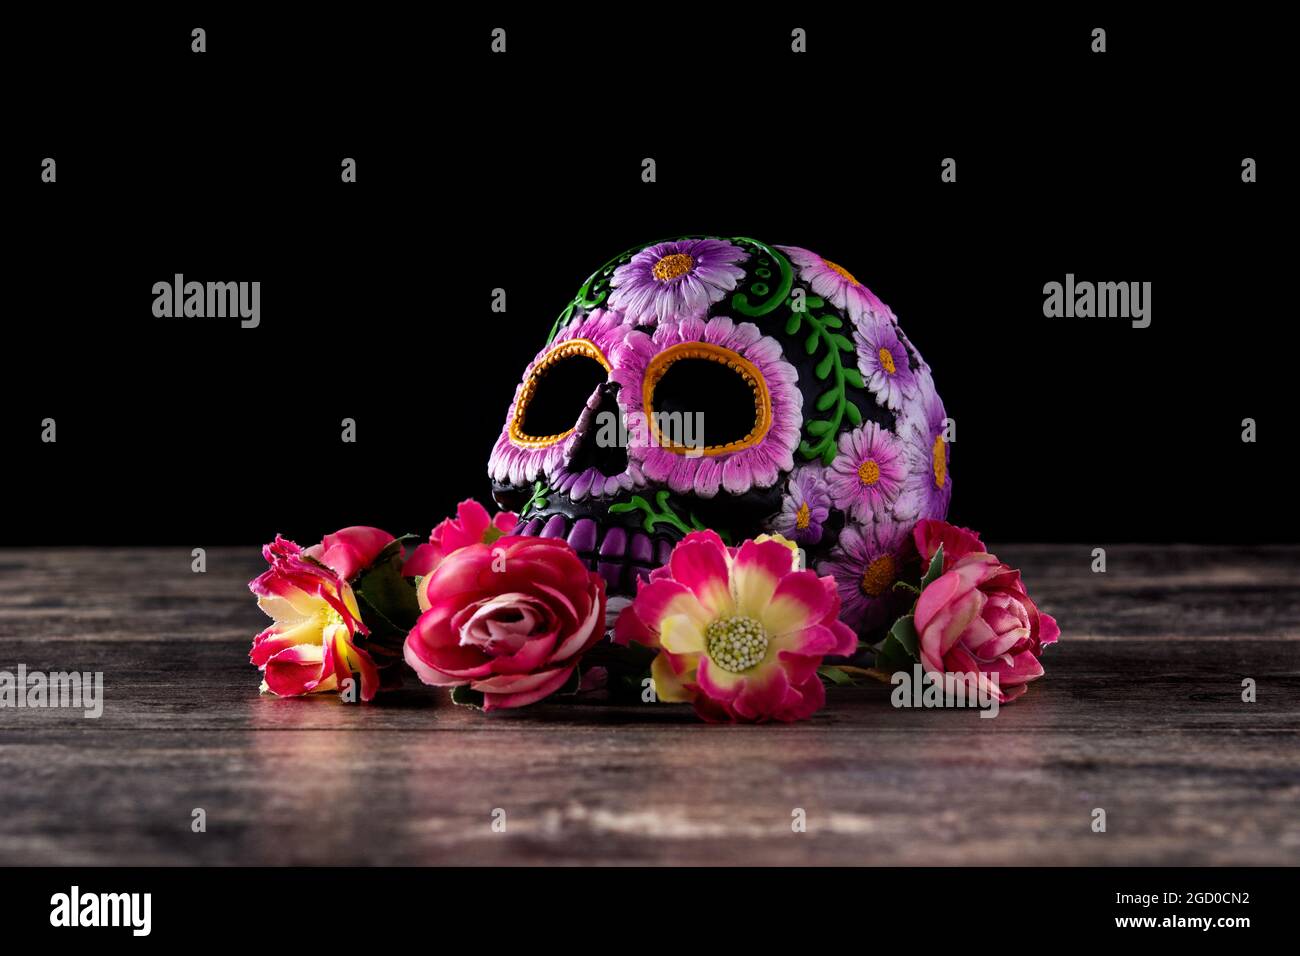 Typical Mexican skull and flowers diadem on black background. Dia de los muertos. Stock Photo